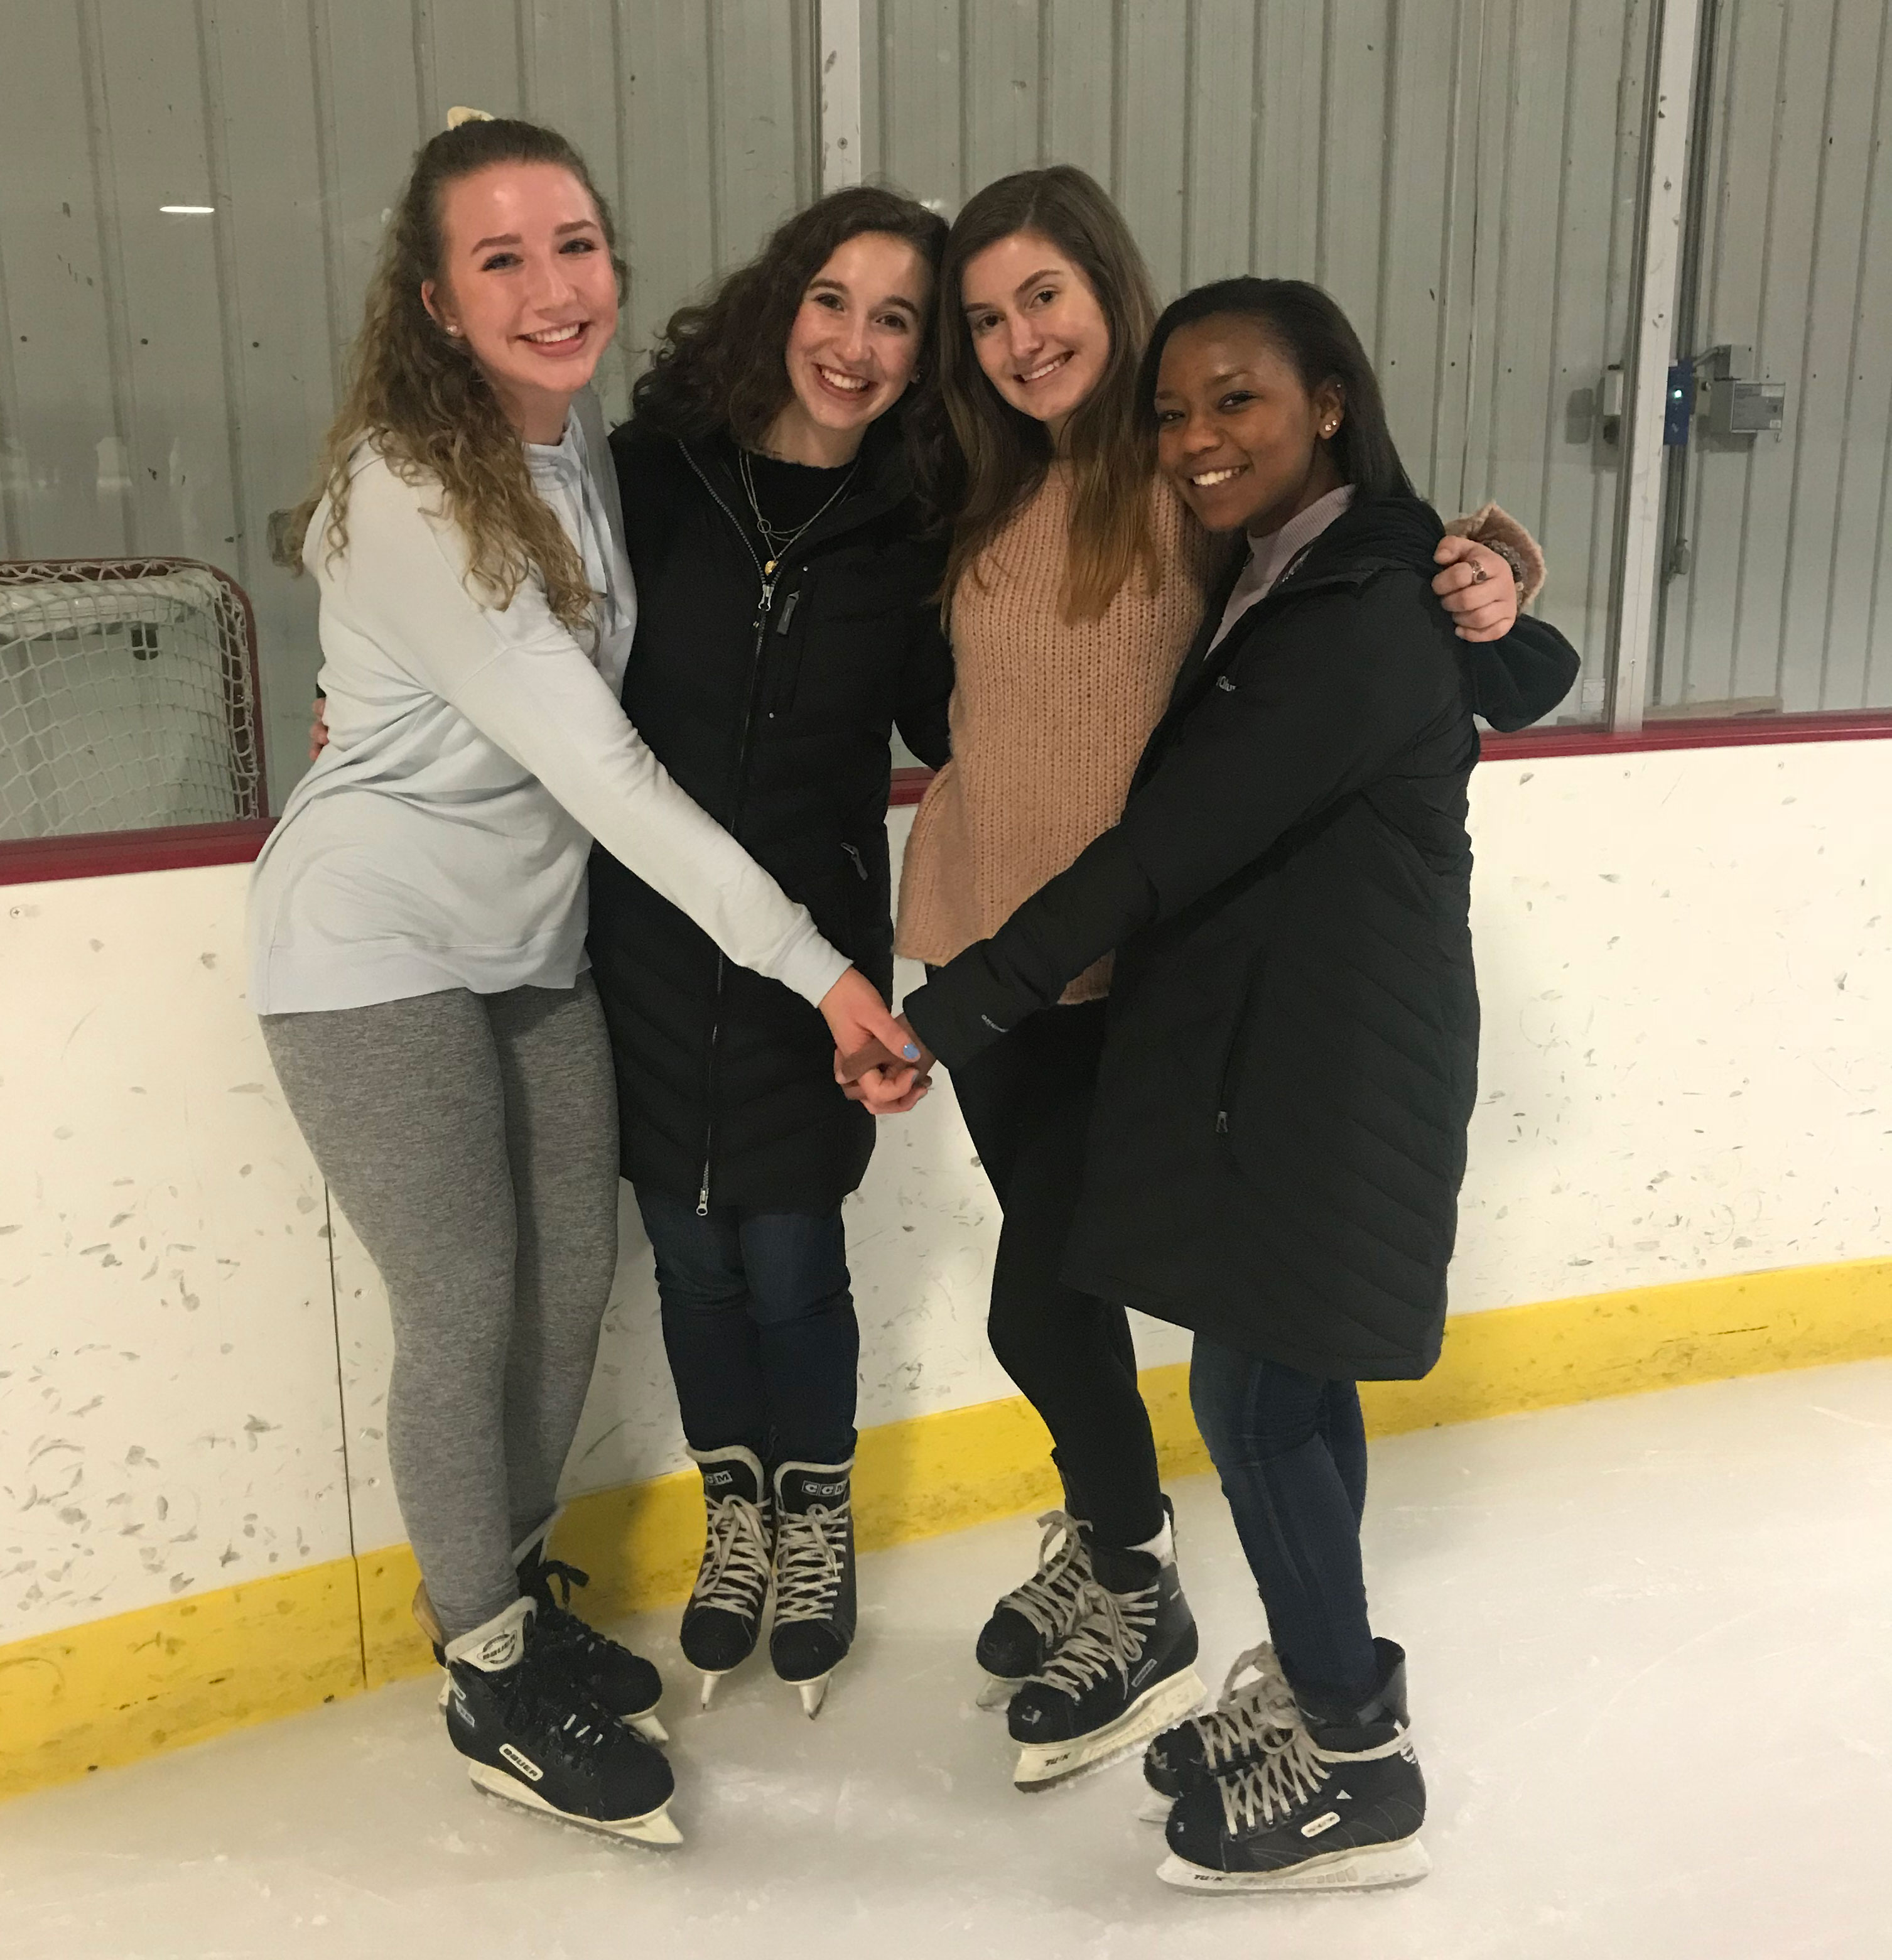 Janae ice skating with her friends.